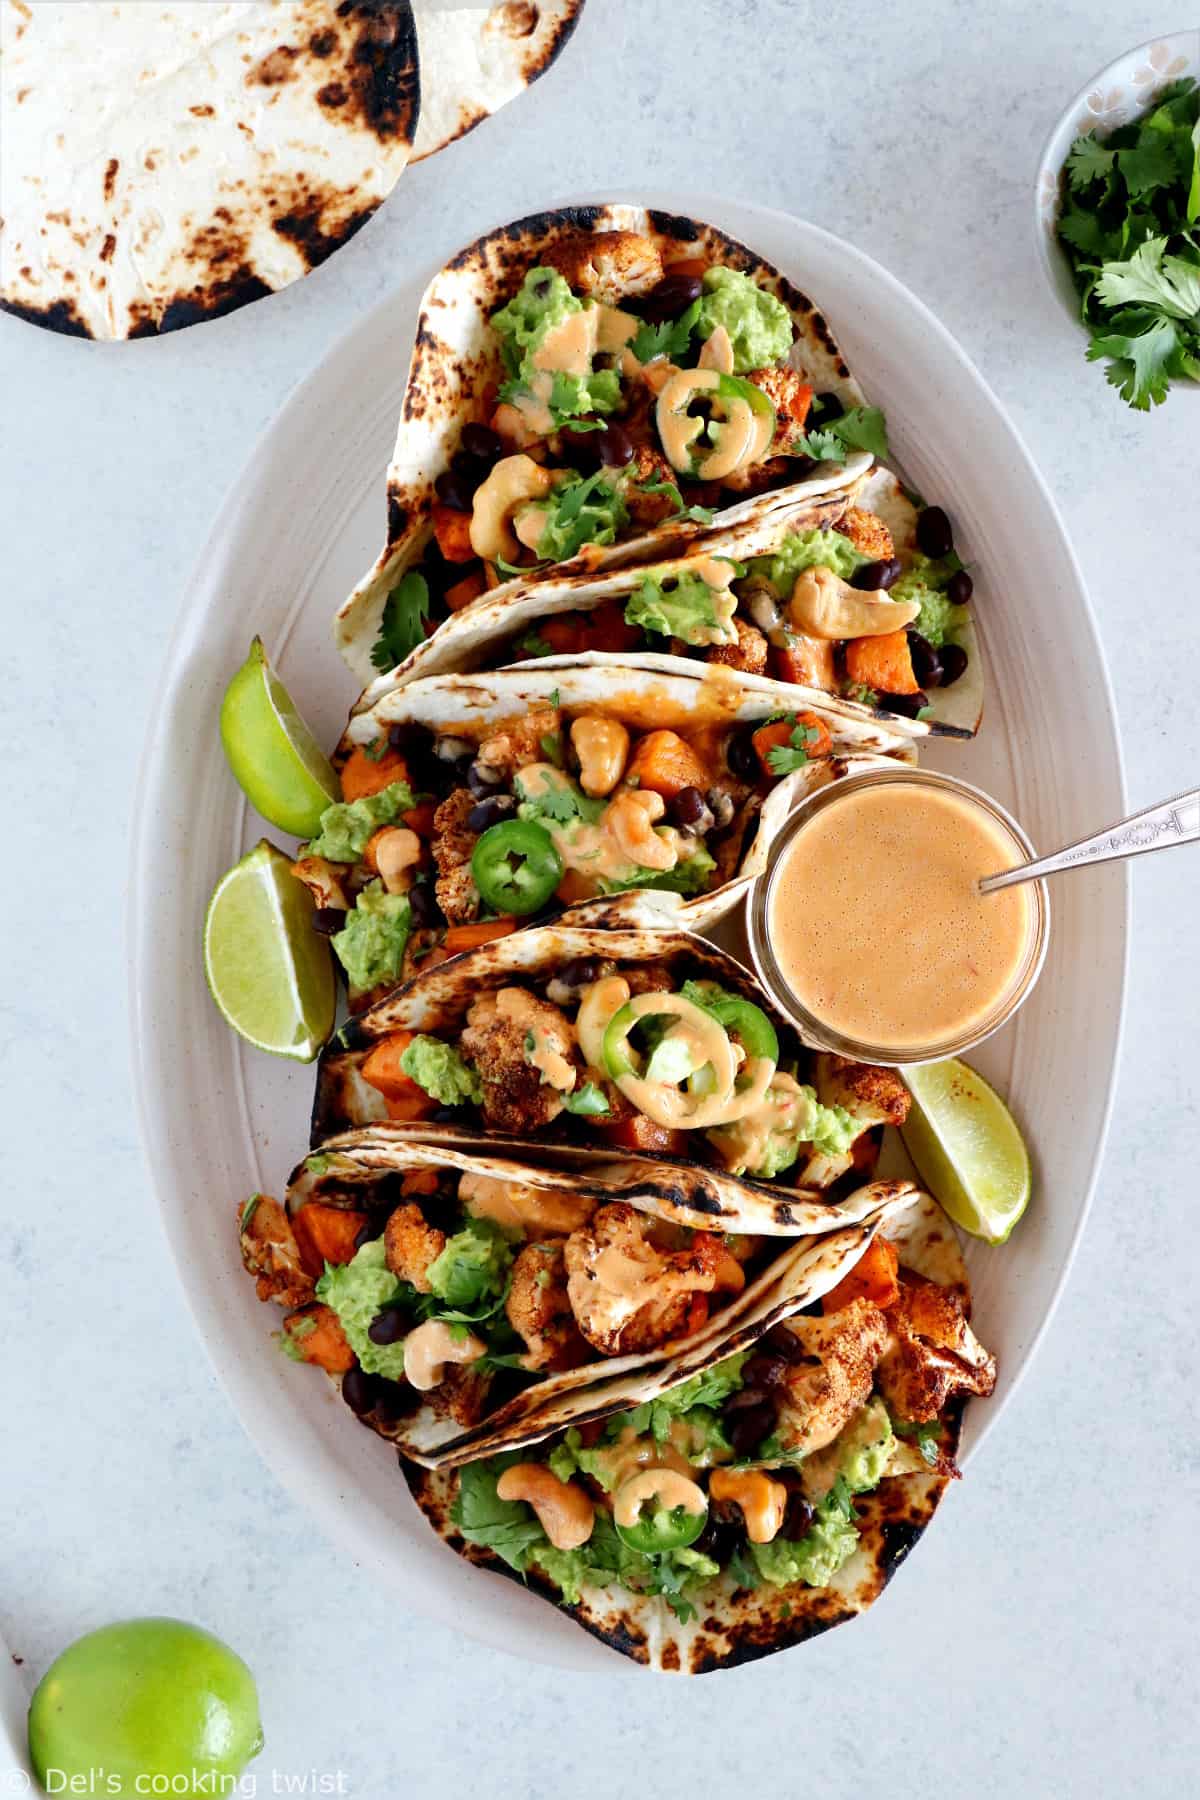 Spicy Vegan Sweet Potato and Cauliflower Tacos. Healthy vegan tacos filled with roasted sweet potato and cauliflower, mashed avocado and topped with a spicy cashew sauce. They are loaded with healthy and hearty flavors and make a perfect, quick, and easy weeknight dinner. These tacos are Oh SO good!